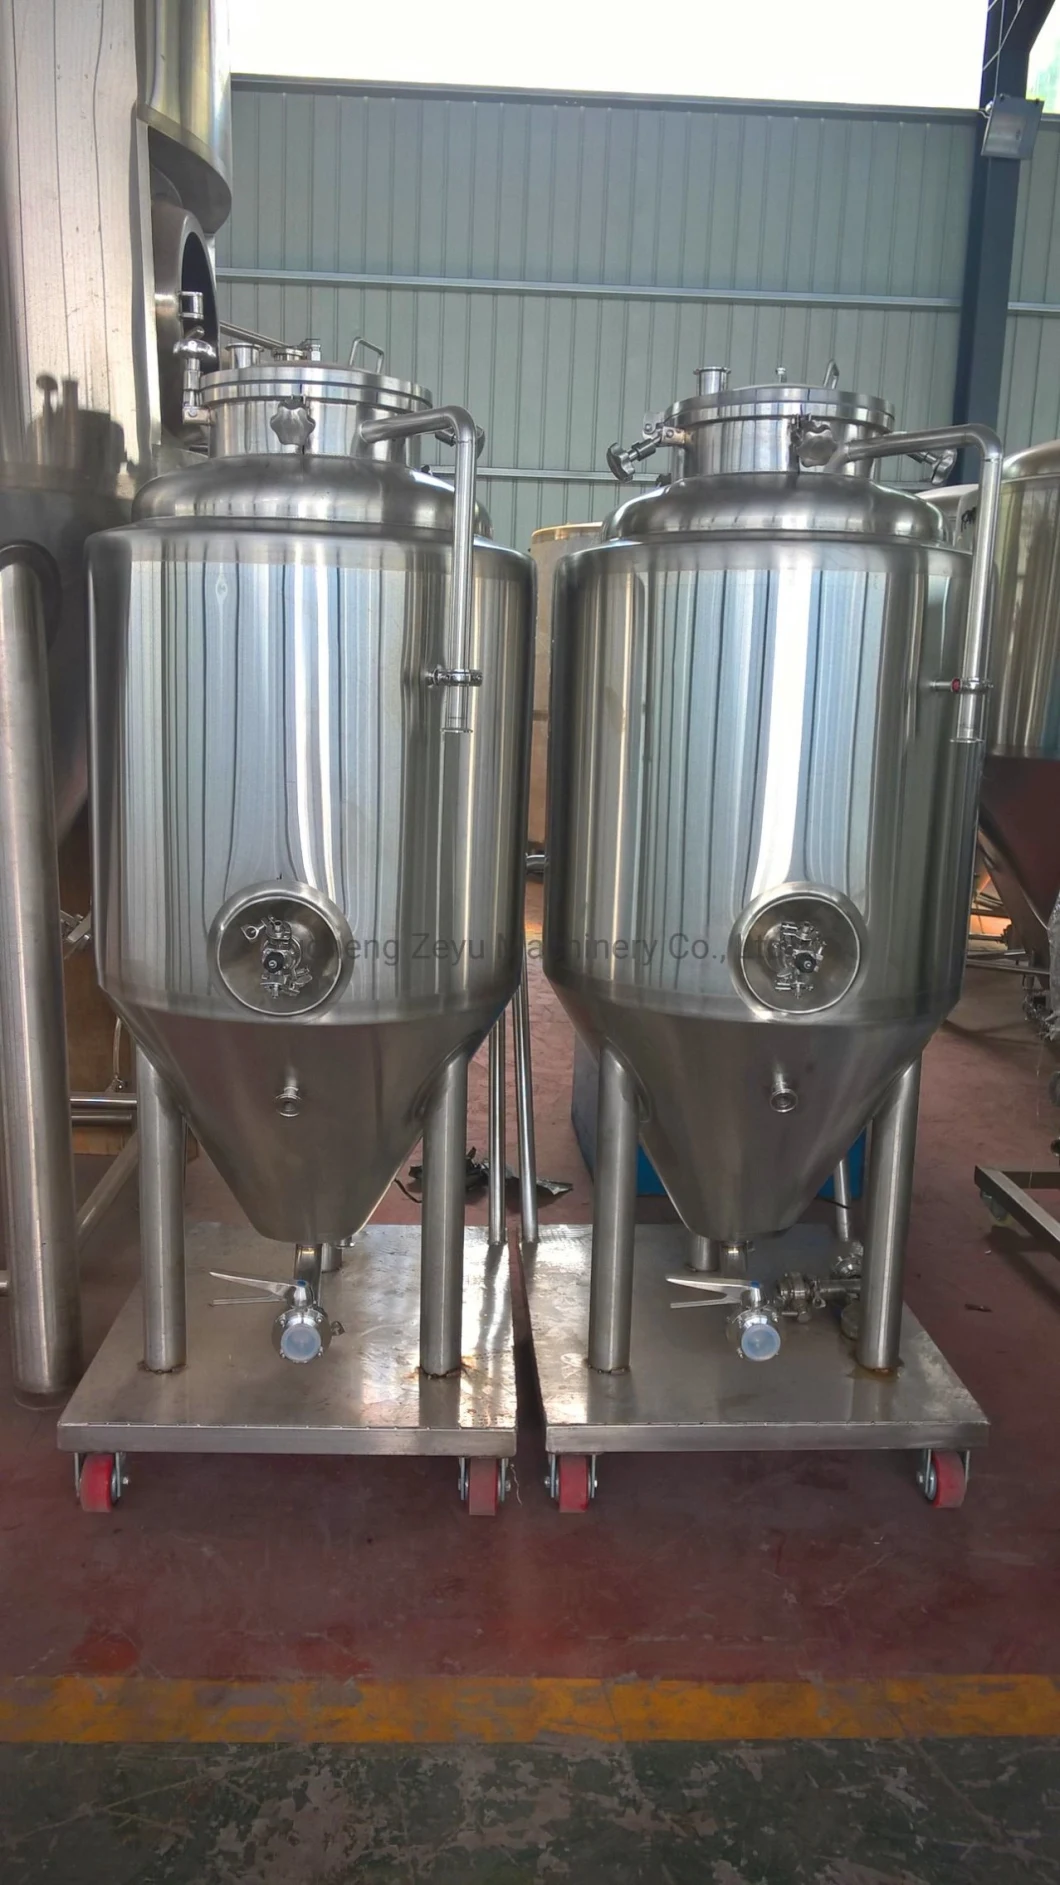 Yeast Processing Tank/ Stainless Steel Fermentation Tank for Yeast